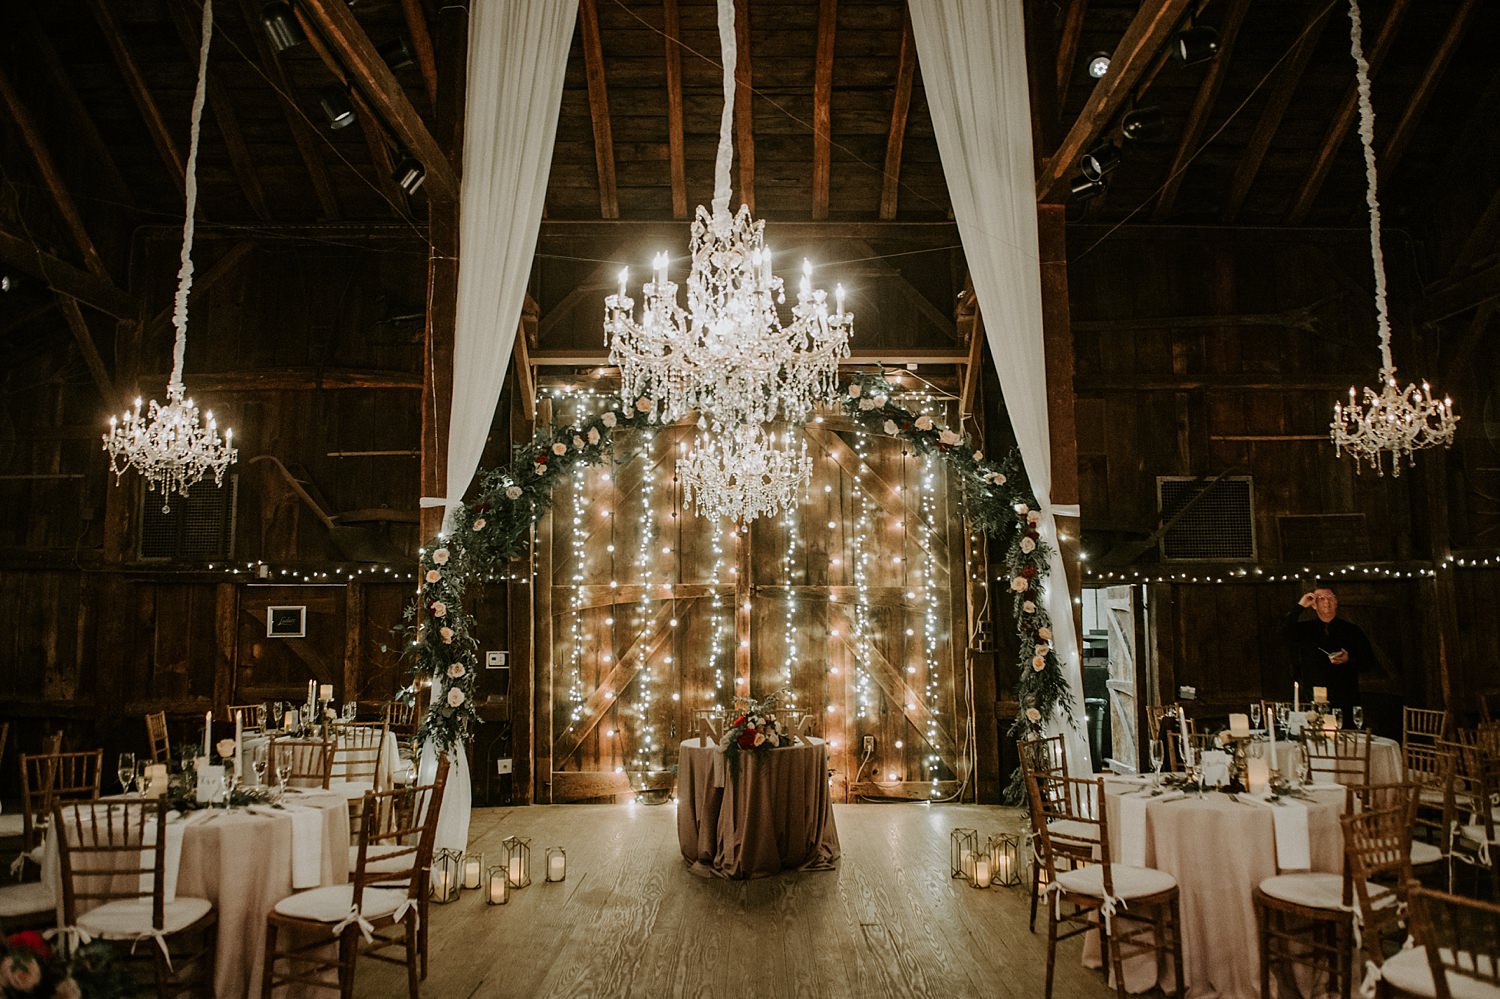 Glamorous and rustic wedding with draping and chandeliers at The Webb Barn in Wethersfield, CT